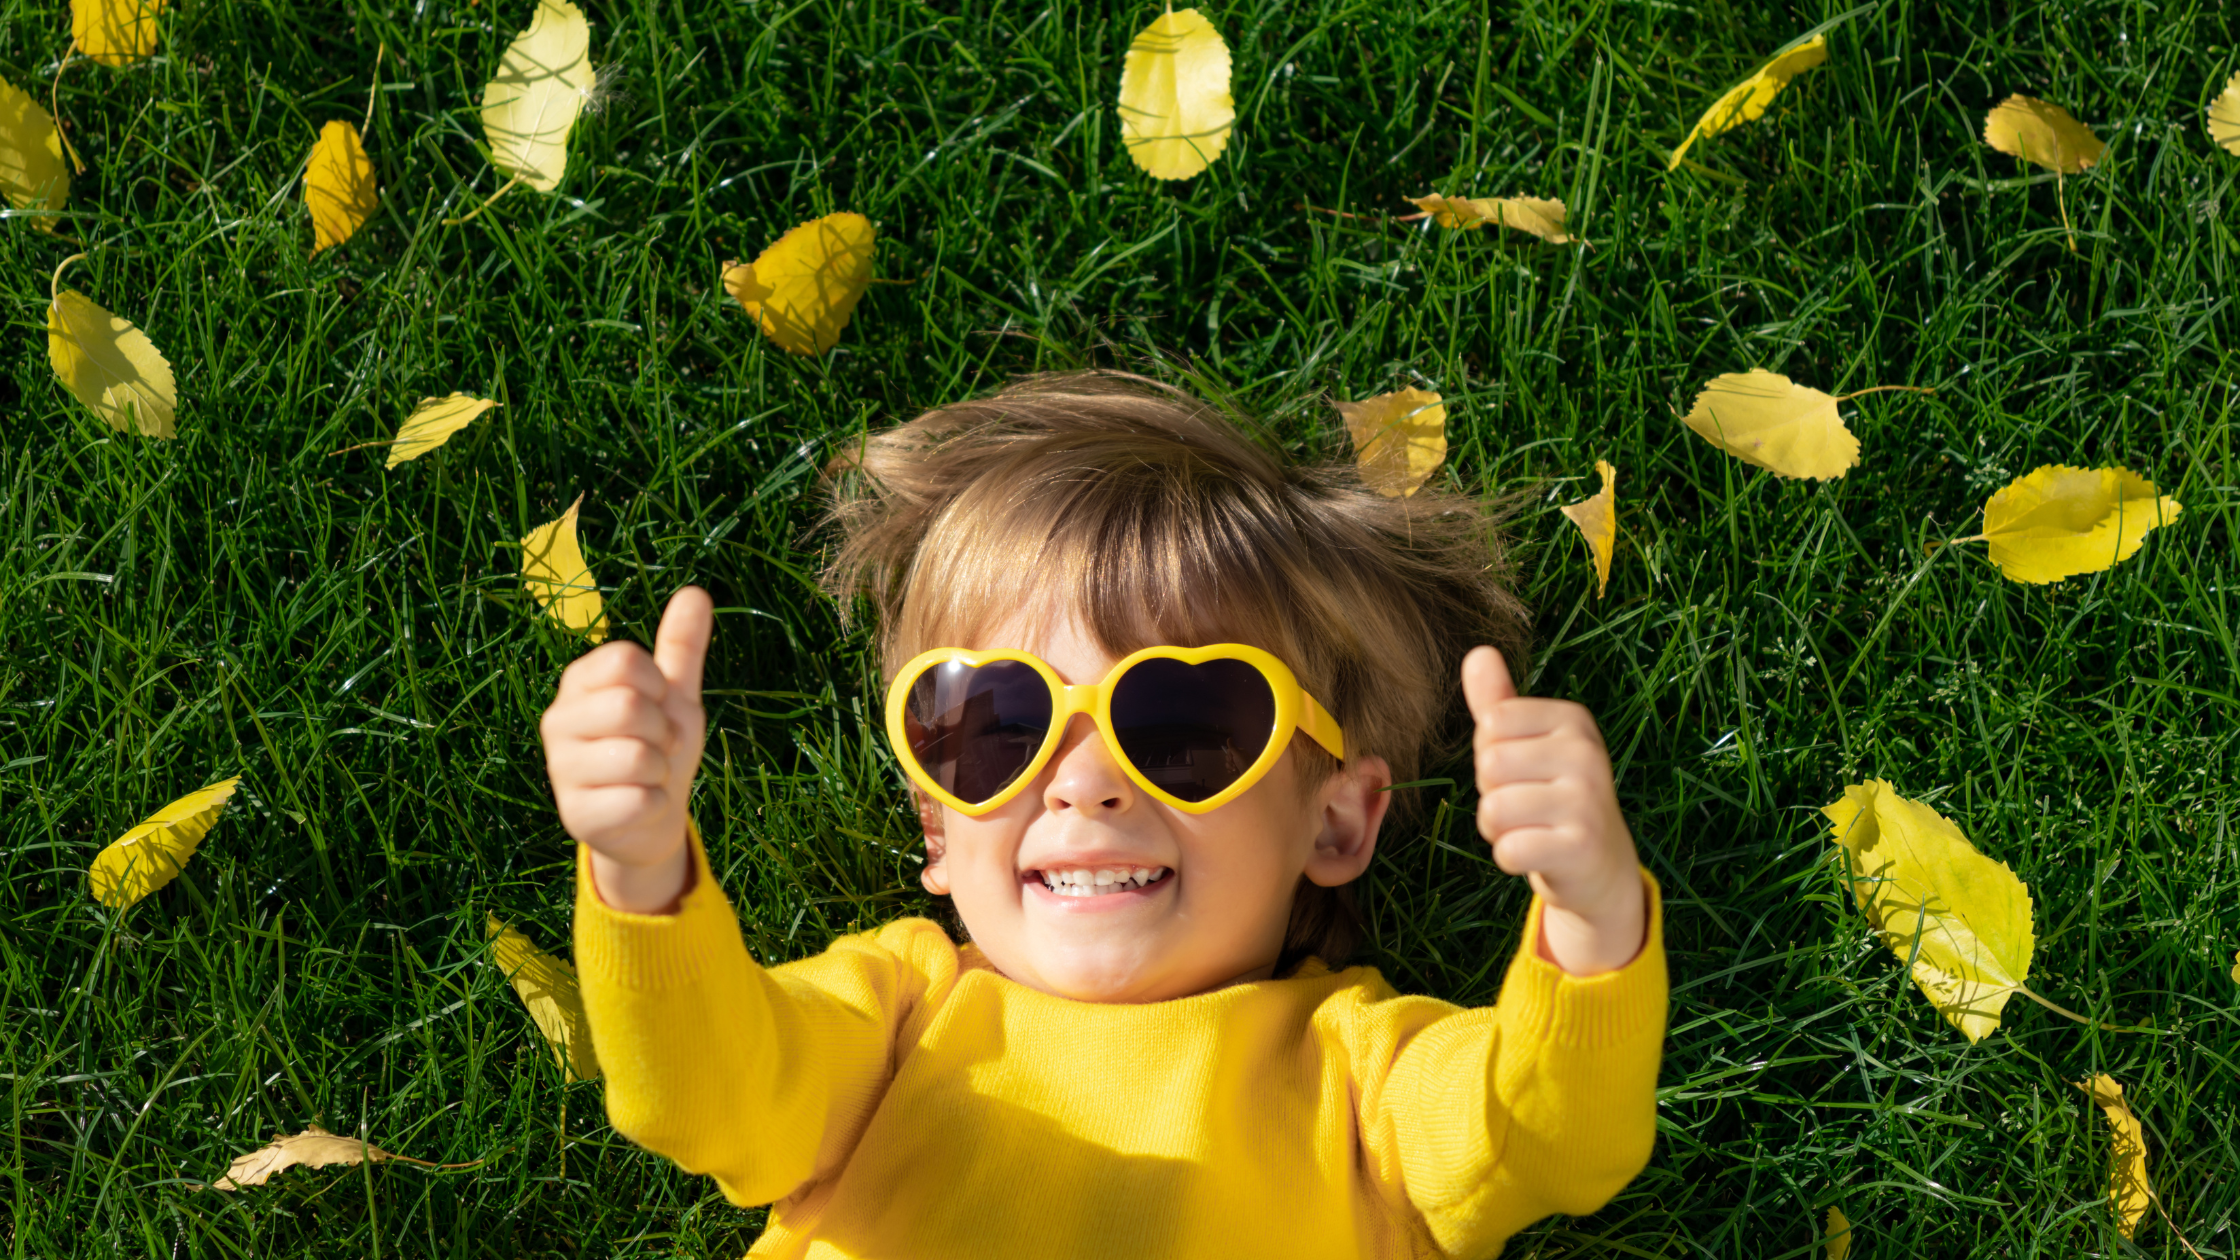 smiling toddler in sunglasses with two thumbs up